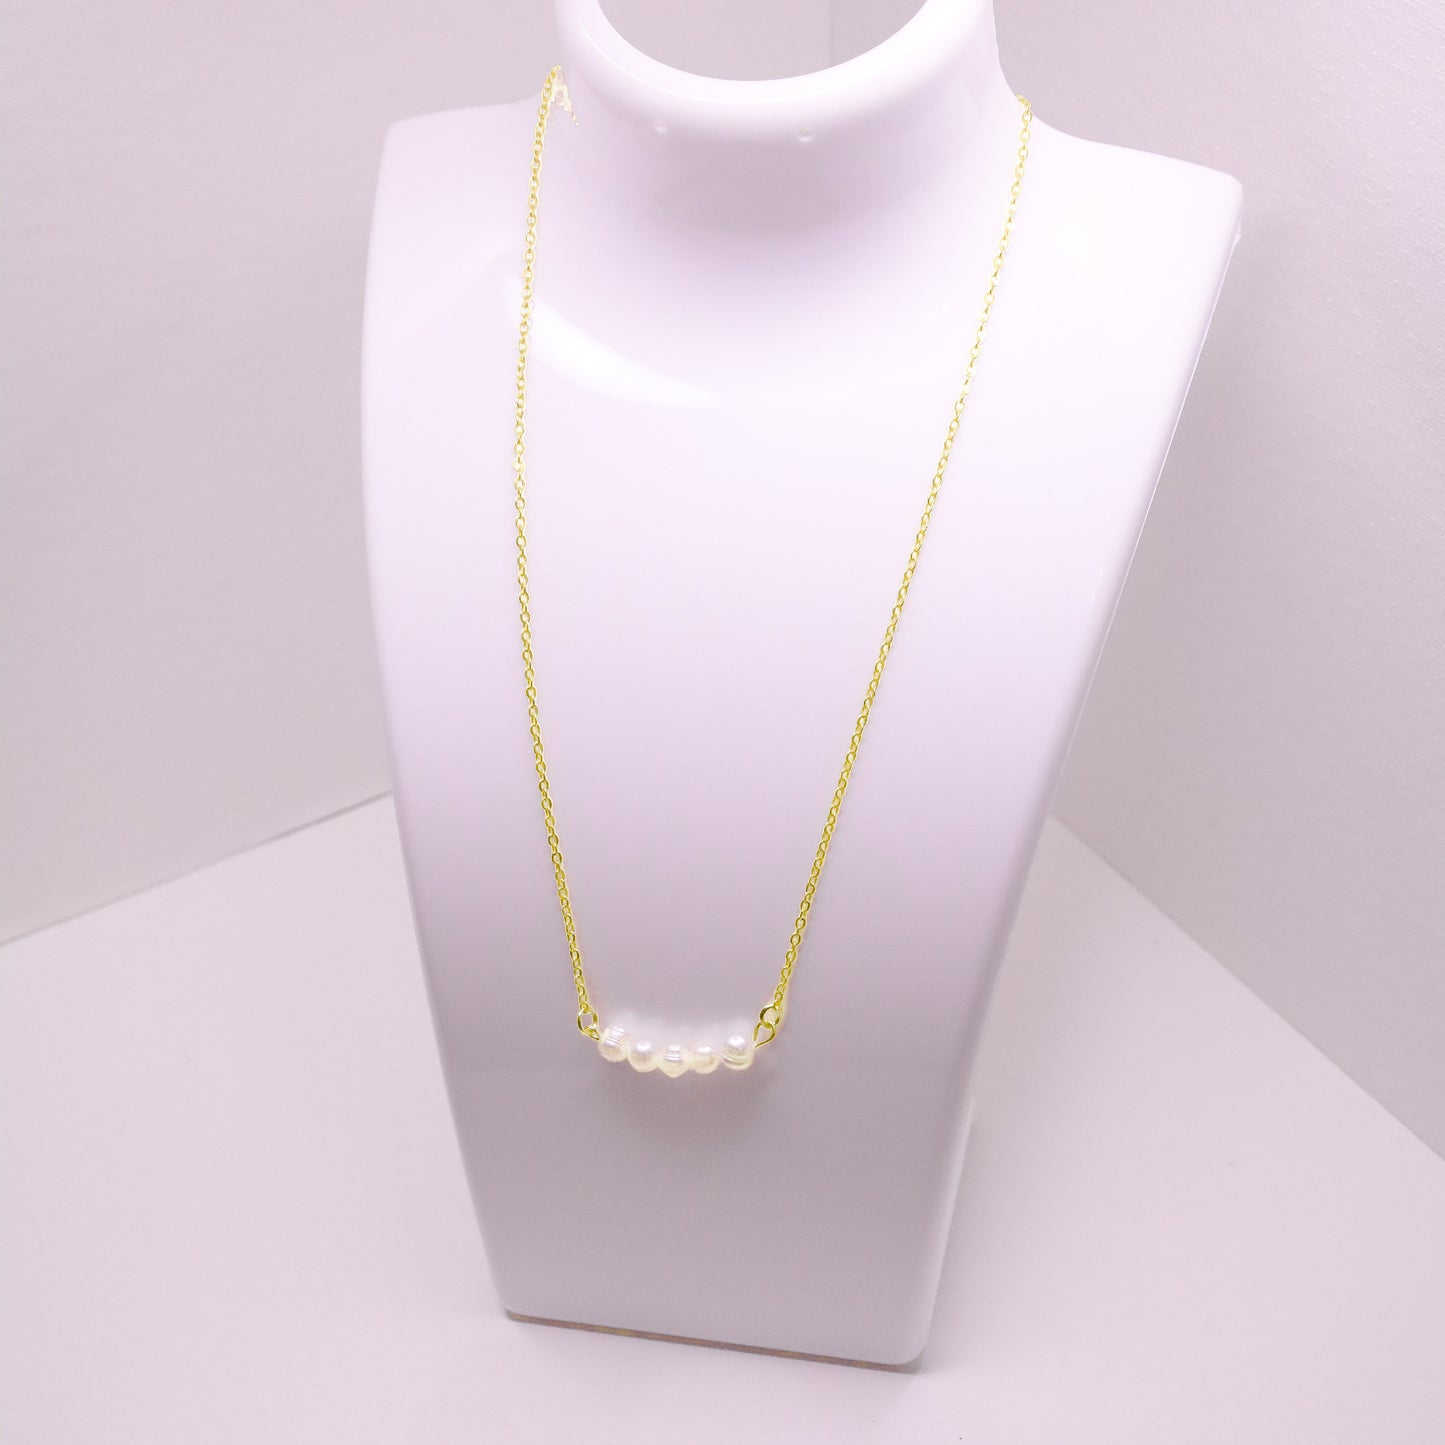 Gold necklace with Freshwater Pearl accent beads